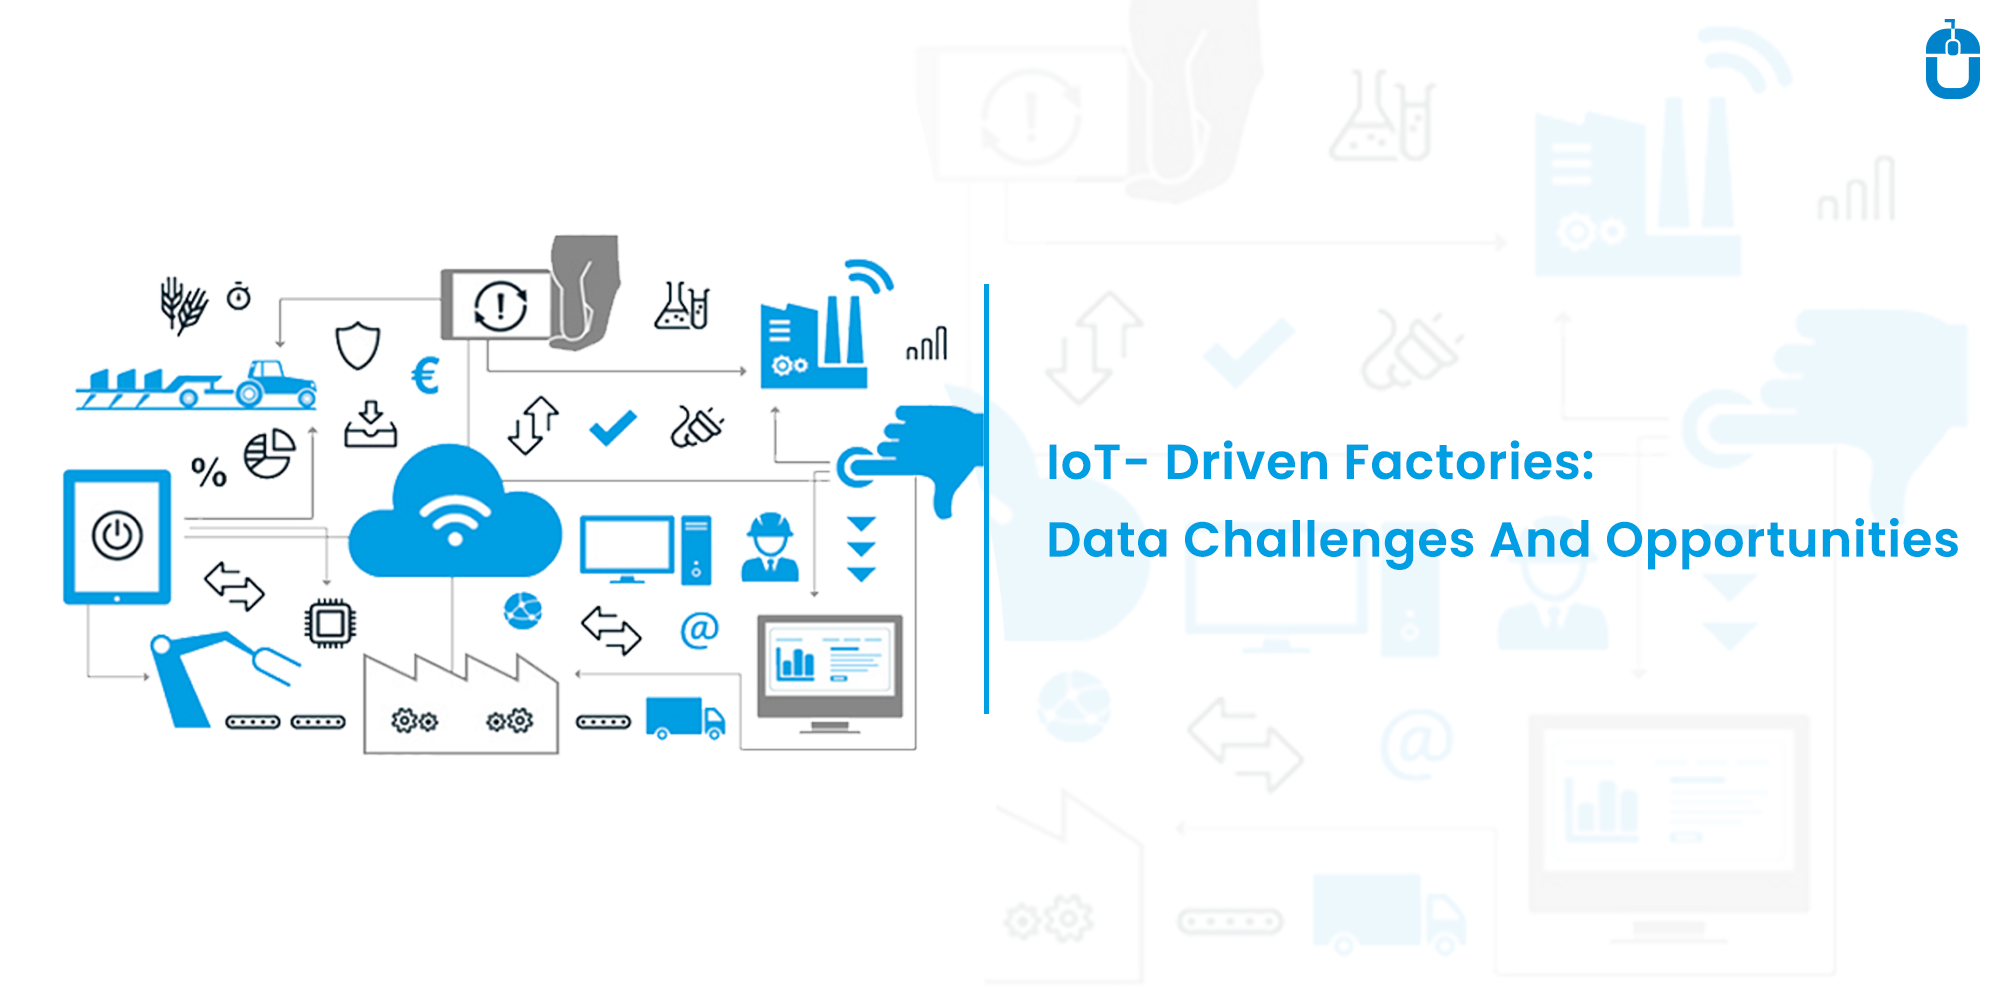 IoT- Driven Factories: Data Challenges And Opportunities